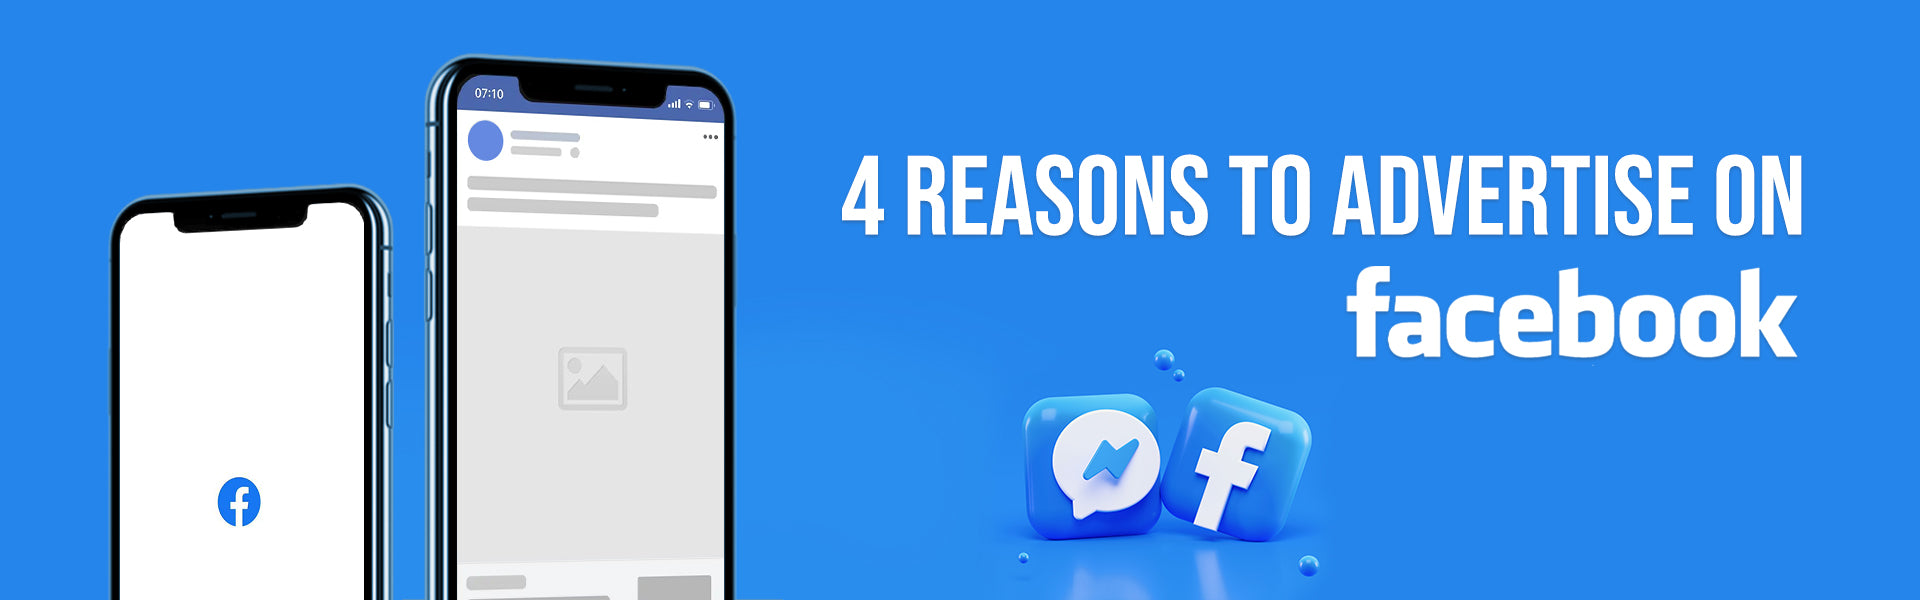 4 Reasons to Advertise on Facebook